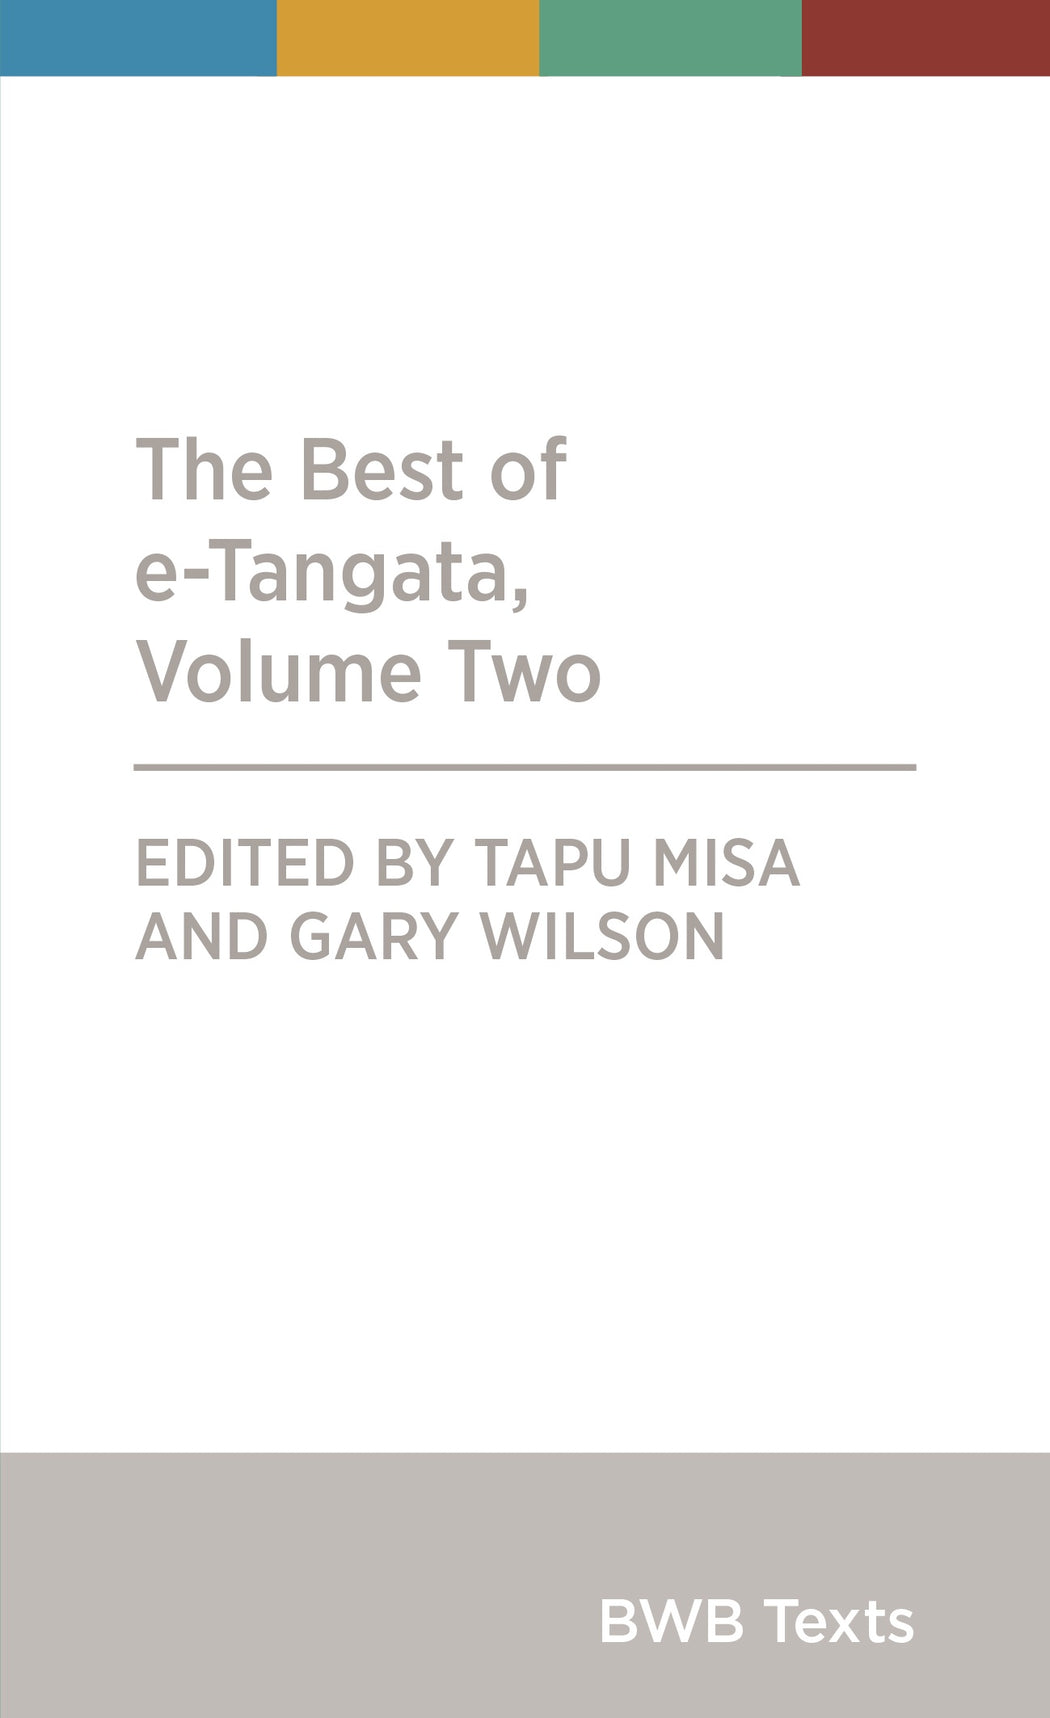 The Best of e-Tangata Volume Two